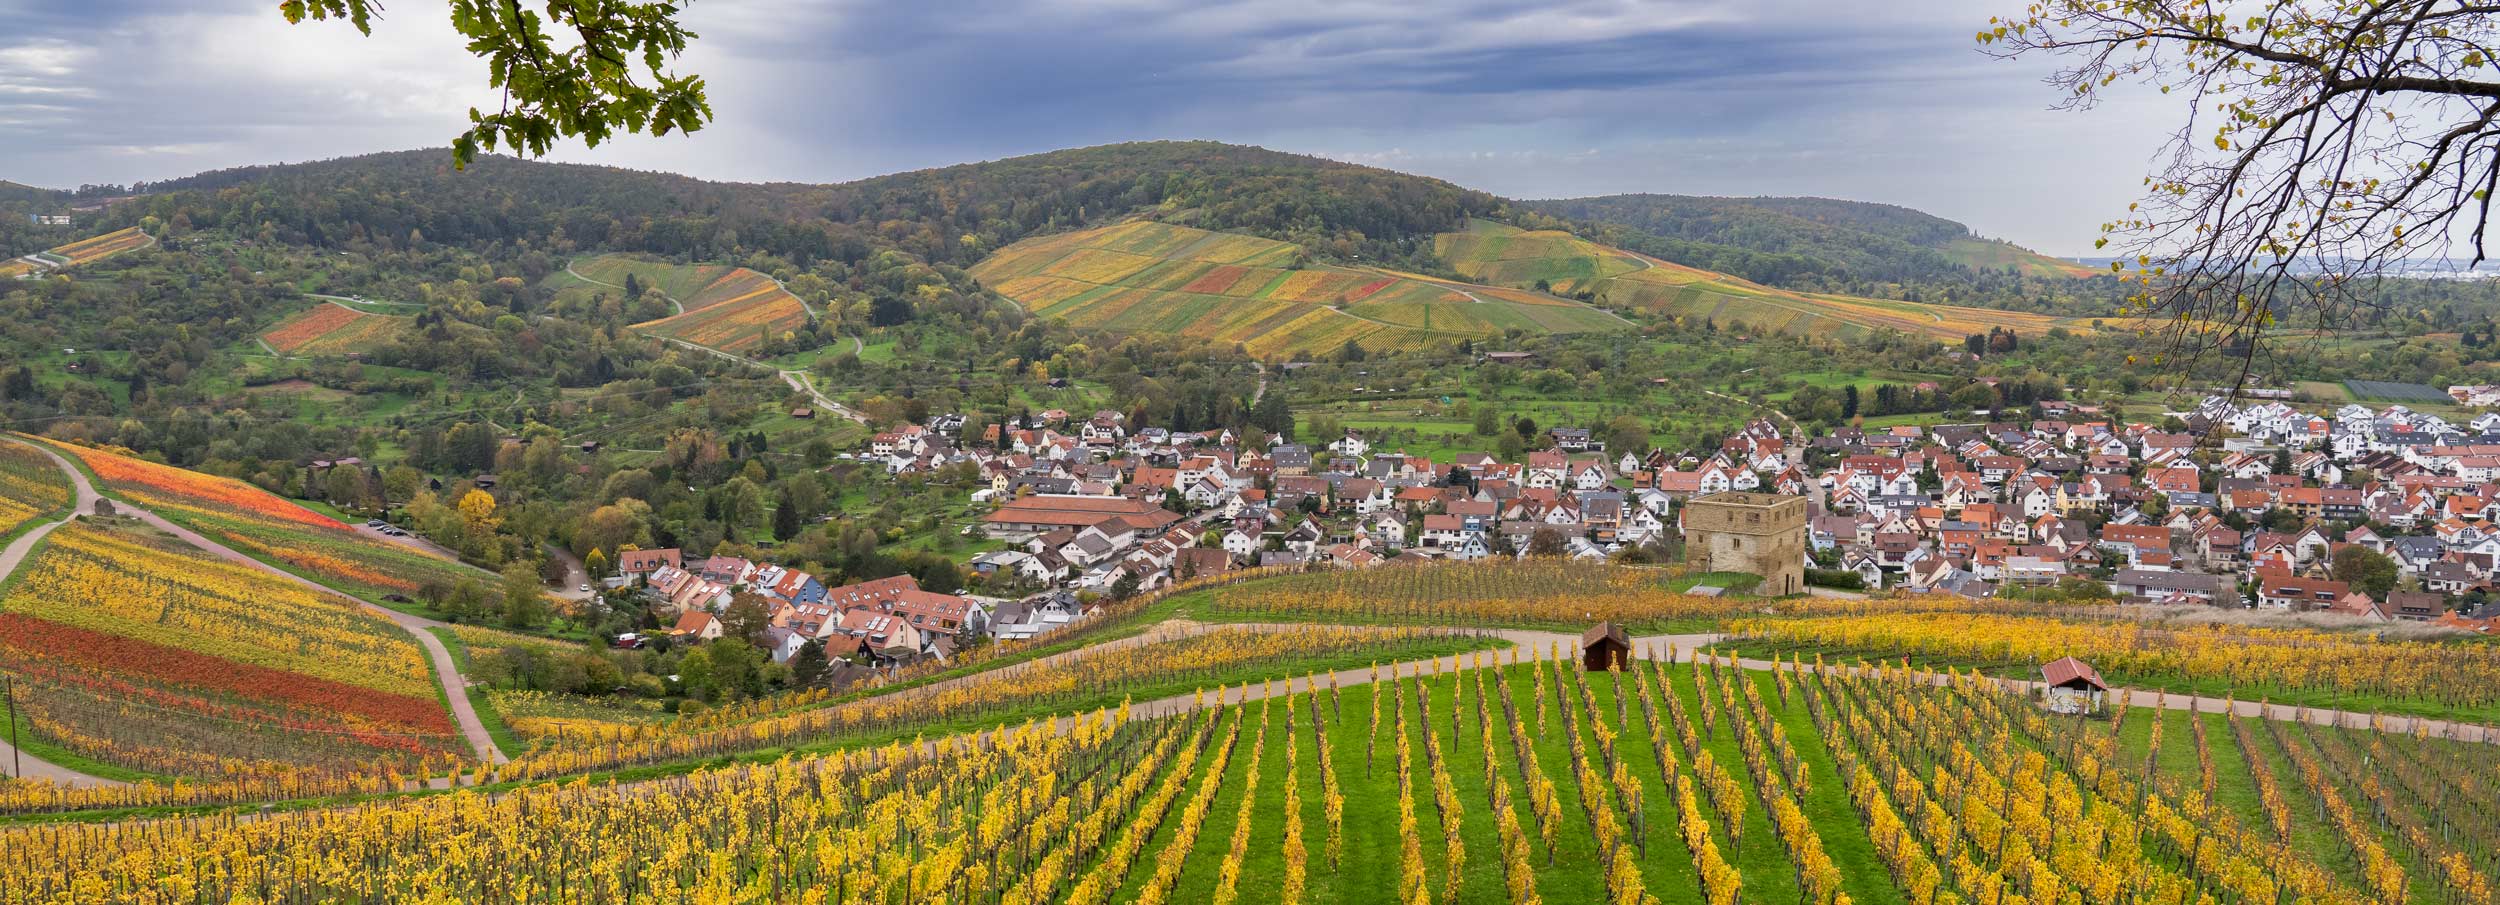 Germany Part II-The Black Forest, Vineyards and Ancient Villages